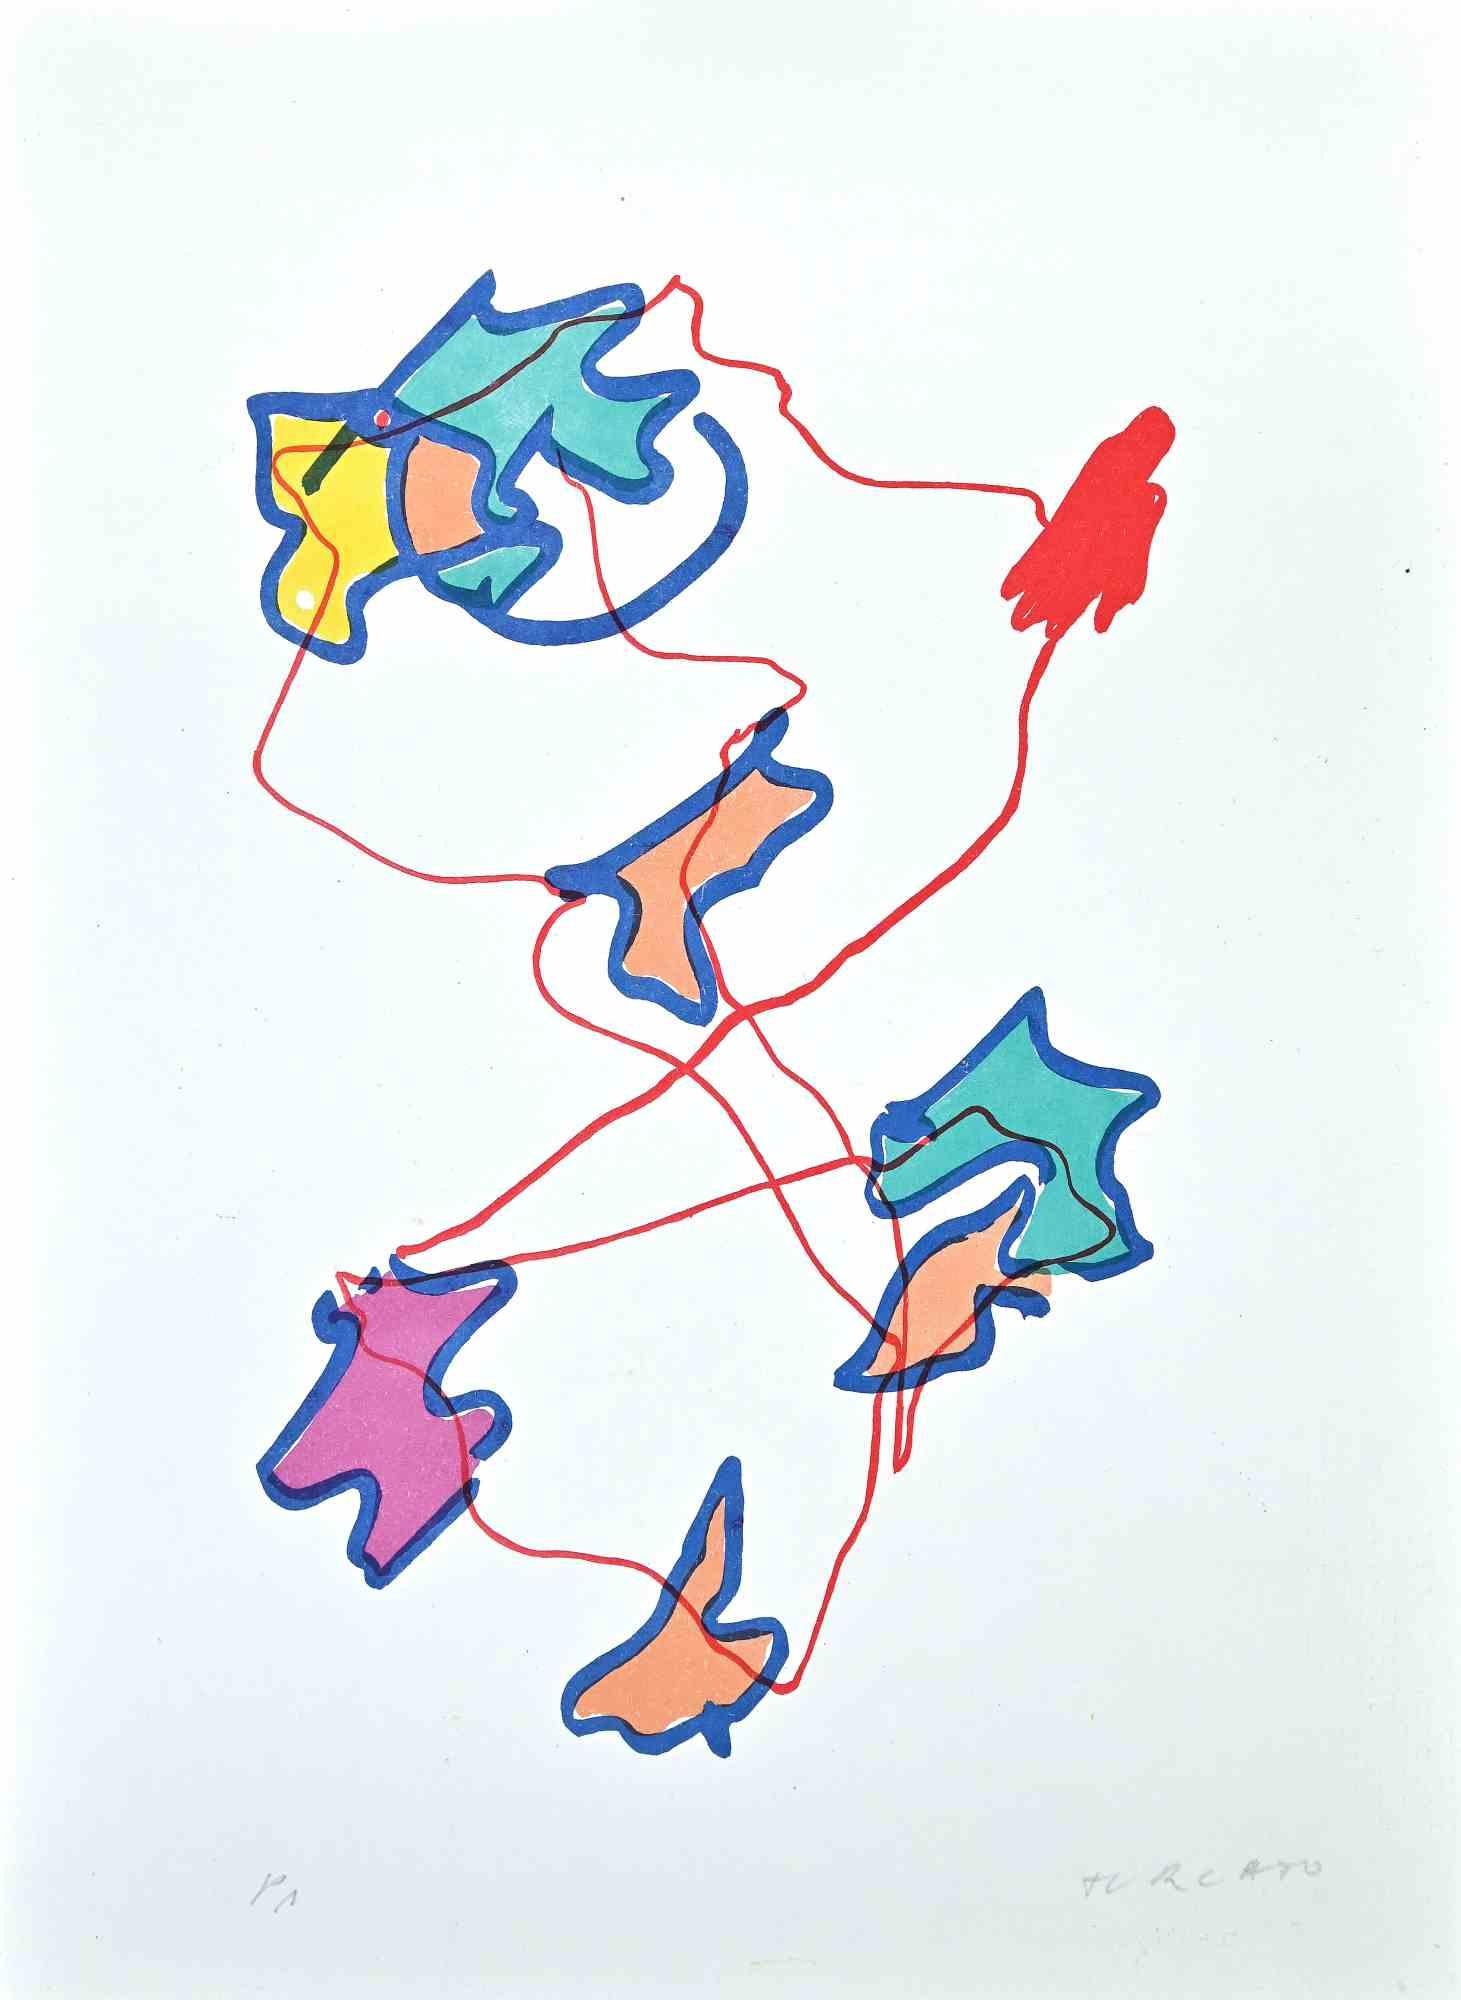 Abstract Composition is a colored lithograph print realized by the contemporary artist Giulio Turcato in 1973.

Hand-signed in pencil on the lower right.

Artist's Proof.

Good conditions.

Giulio Turcato  (1912 - 1995) was an Italian artist who